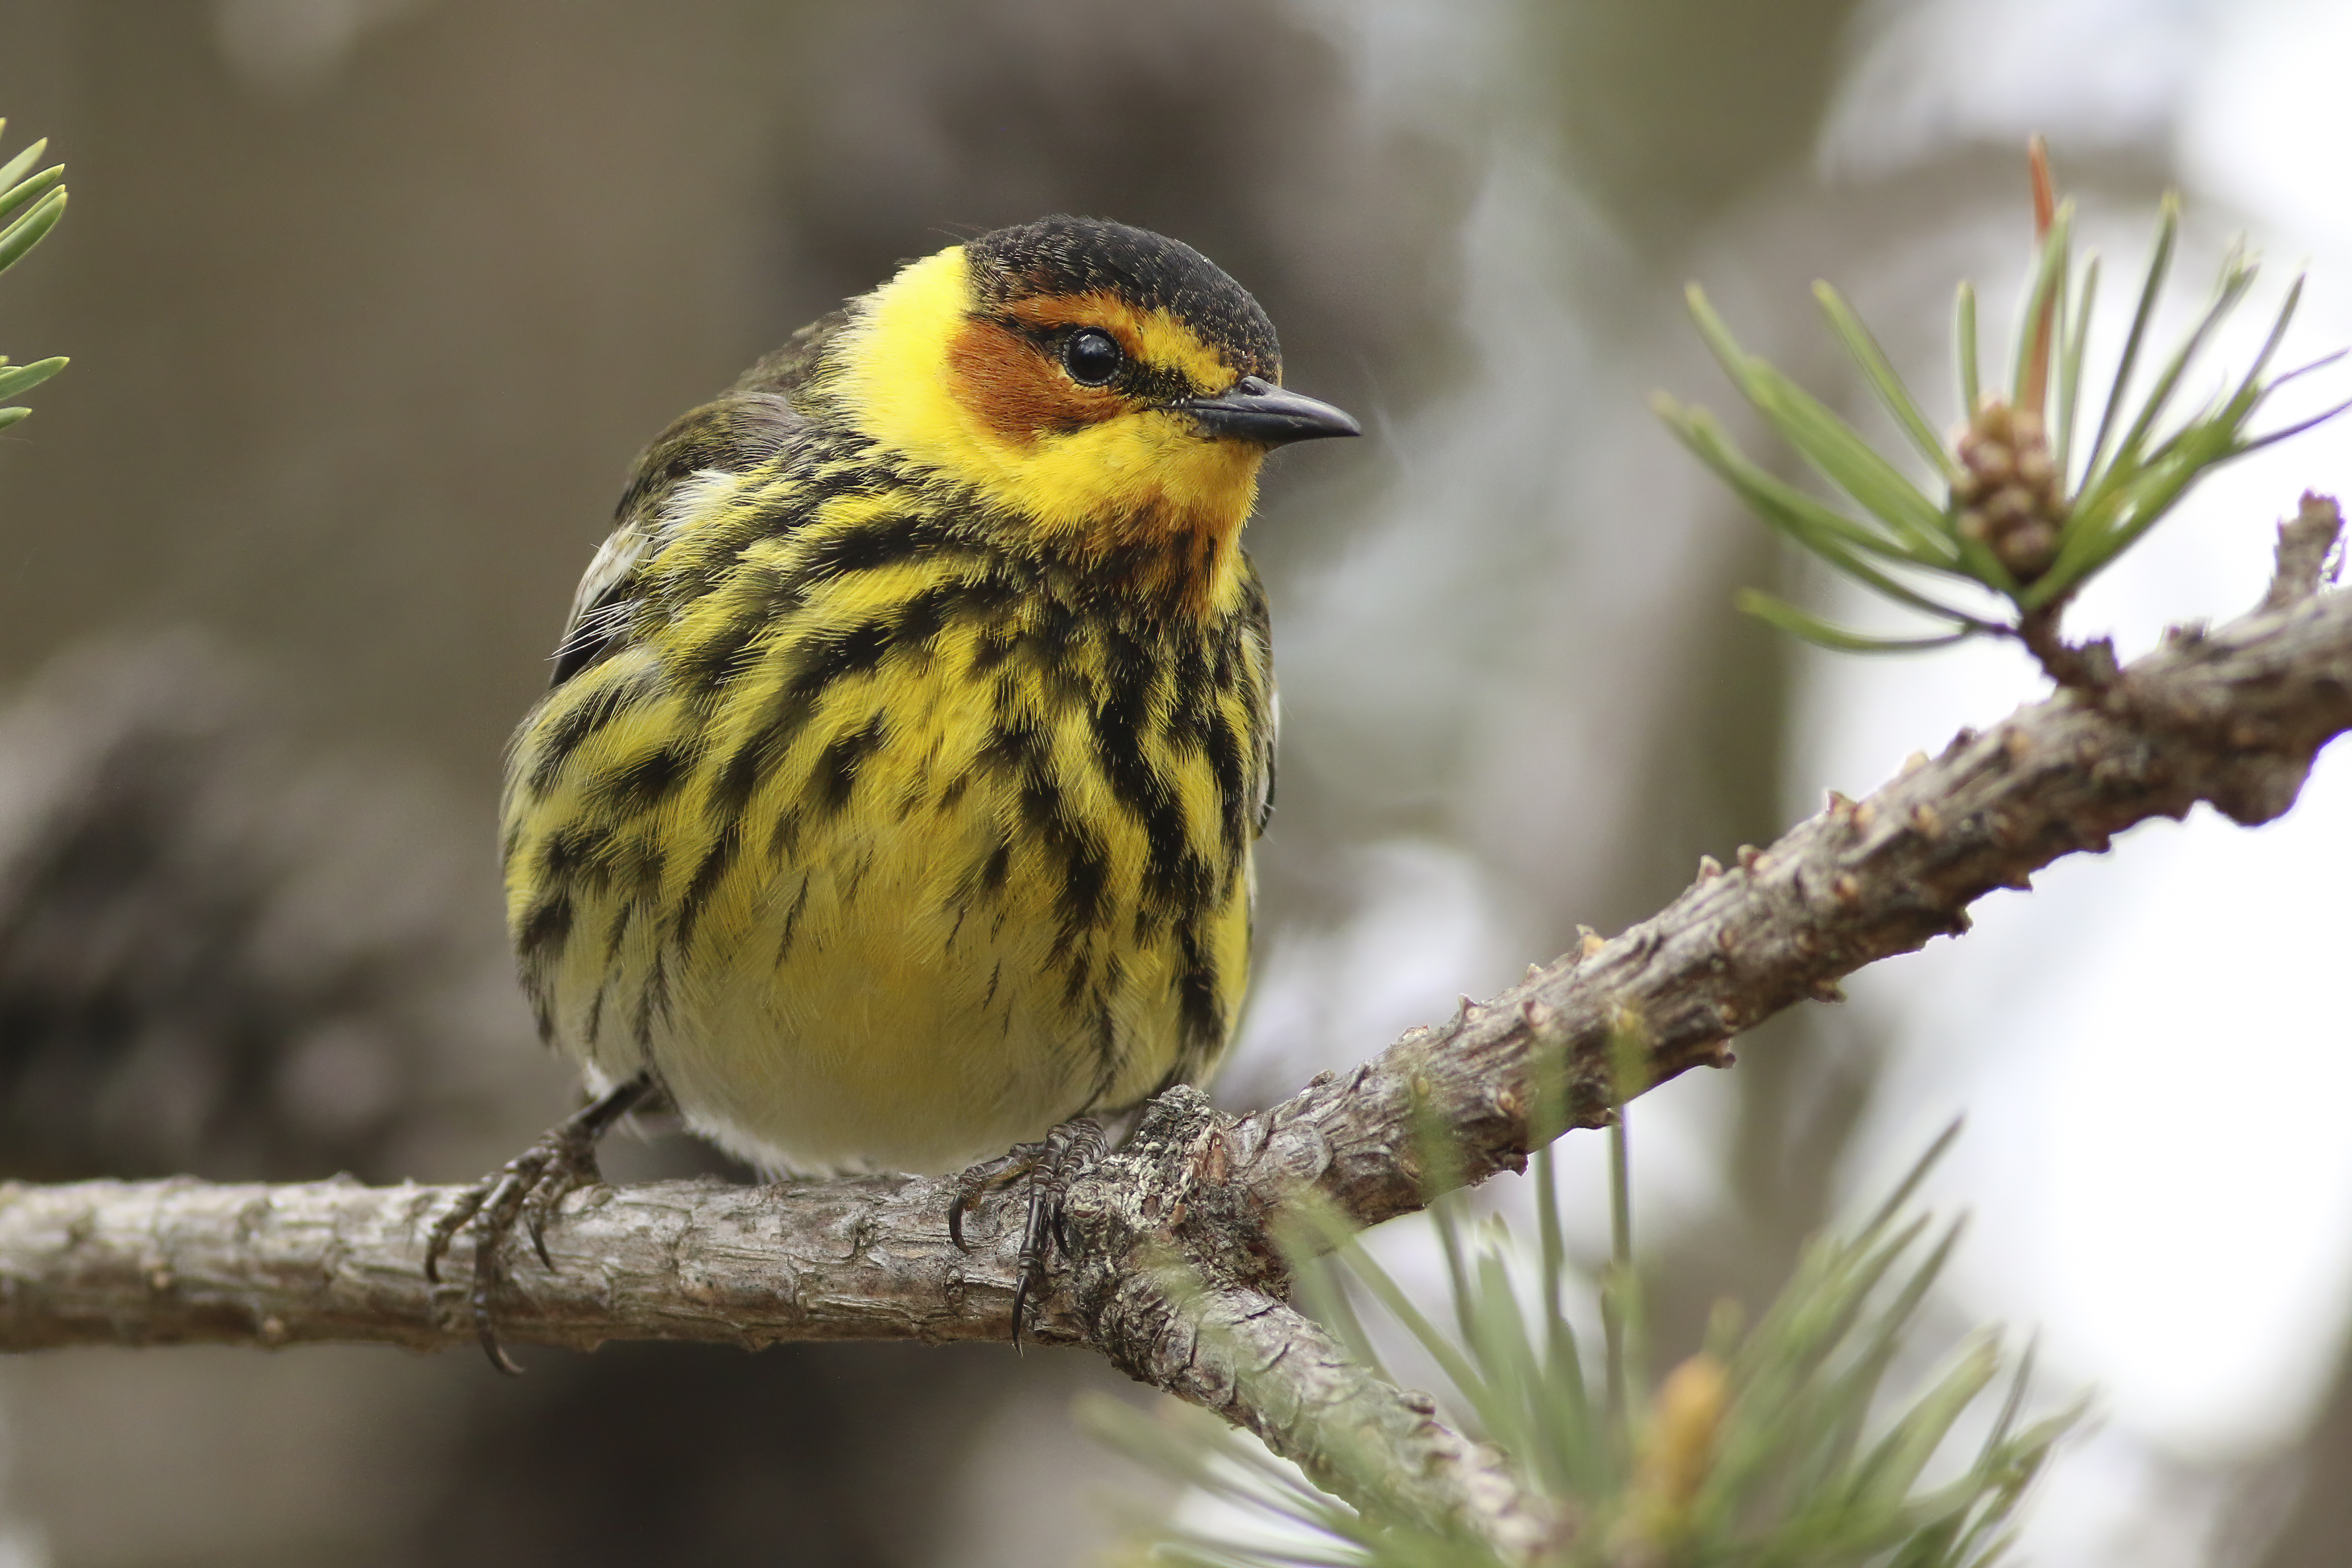 A photograph by Greg Bodker of a yellow and black cape may warbler bird on an evergreen branch.